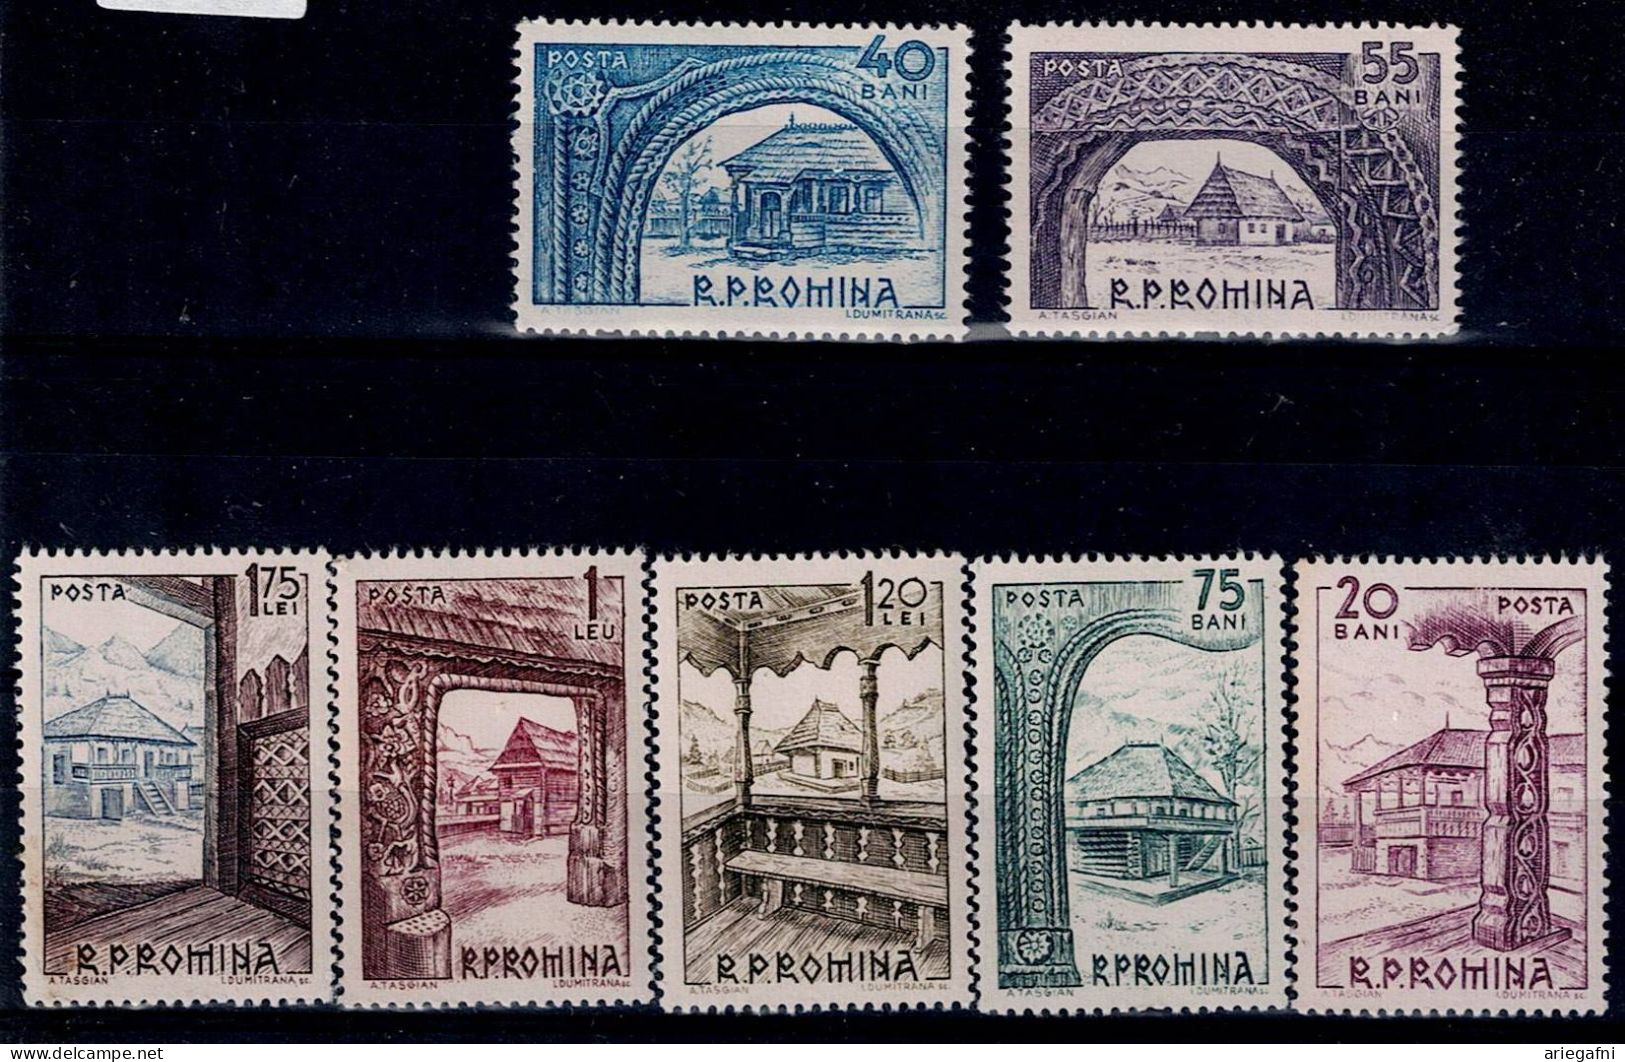 ROMANIA 1963 OPEN-AIR MUSEUM OF OLD FARMHOUSES MI No 2222-8 MNH VF!! - Unused Stamps